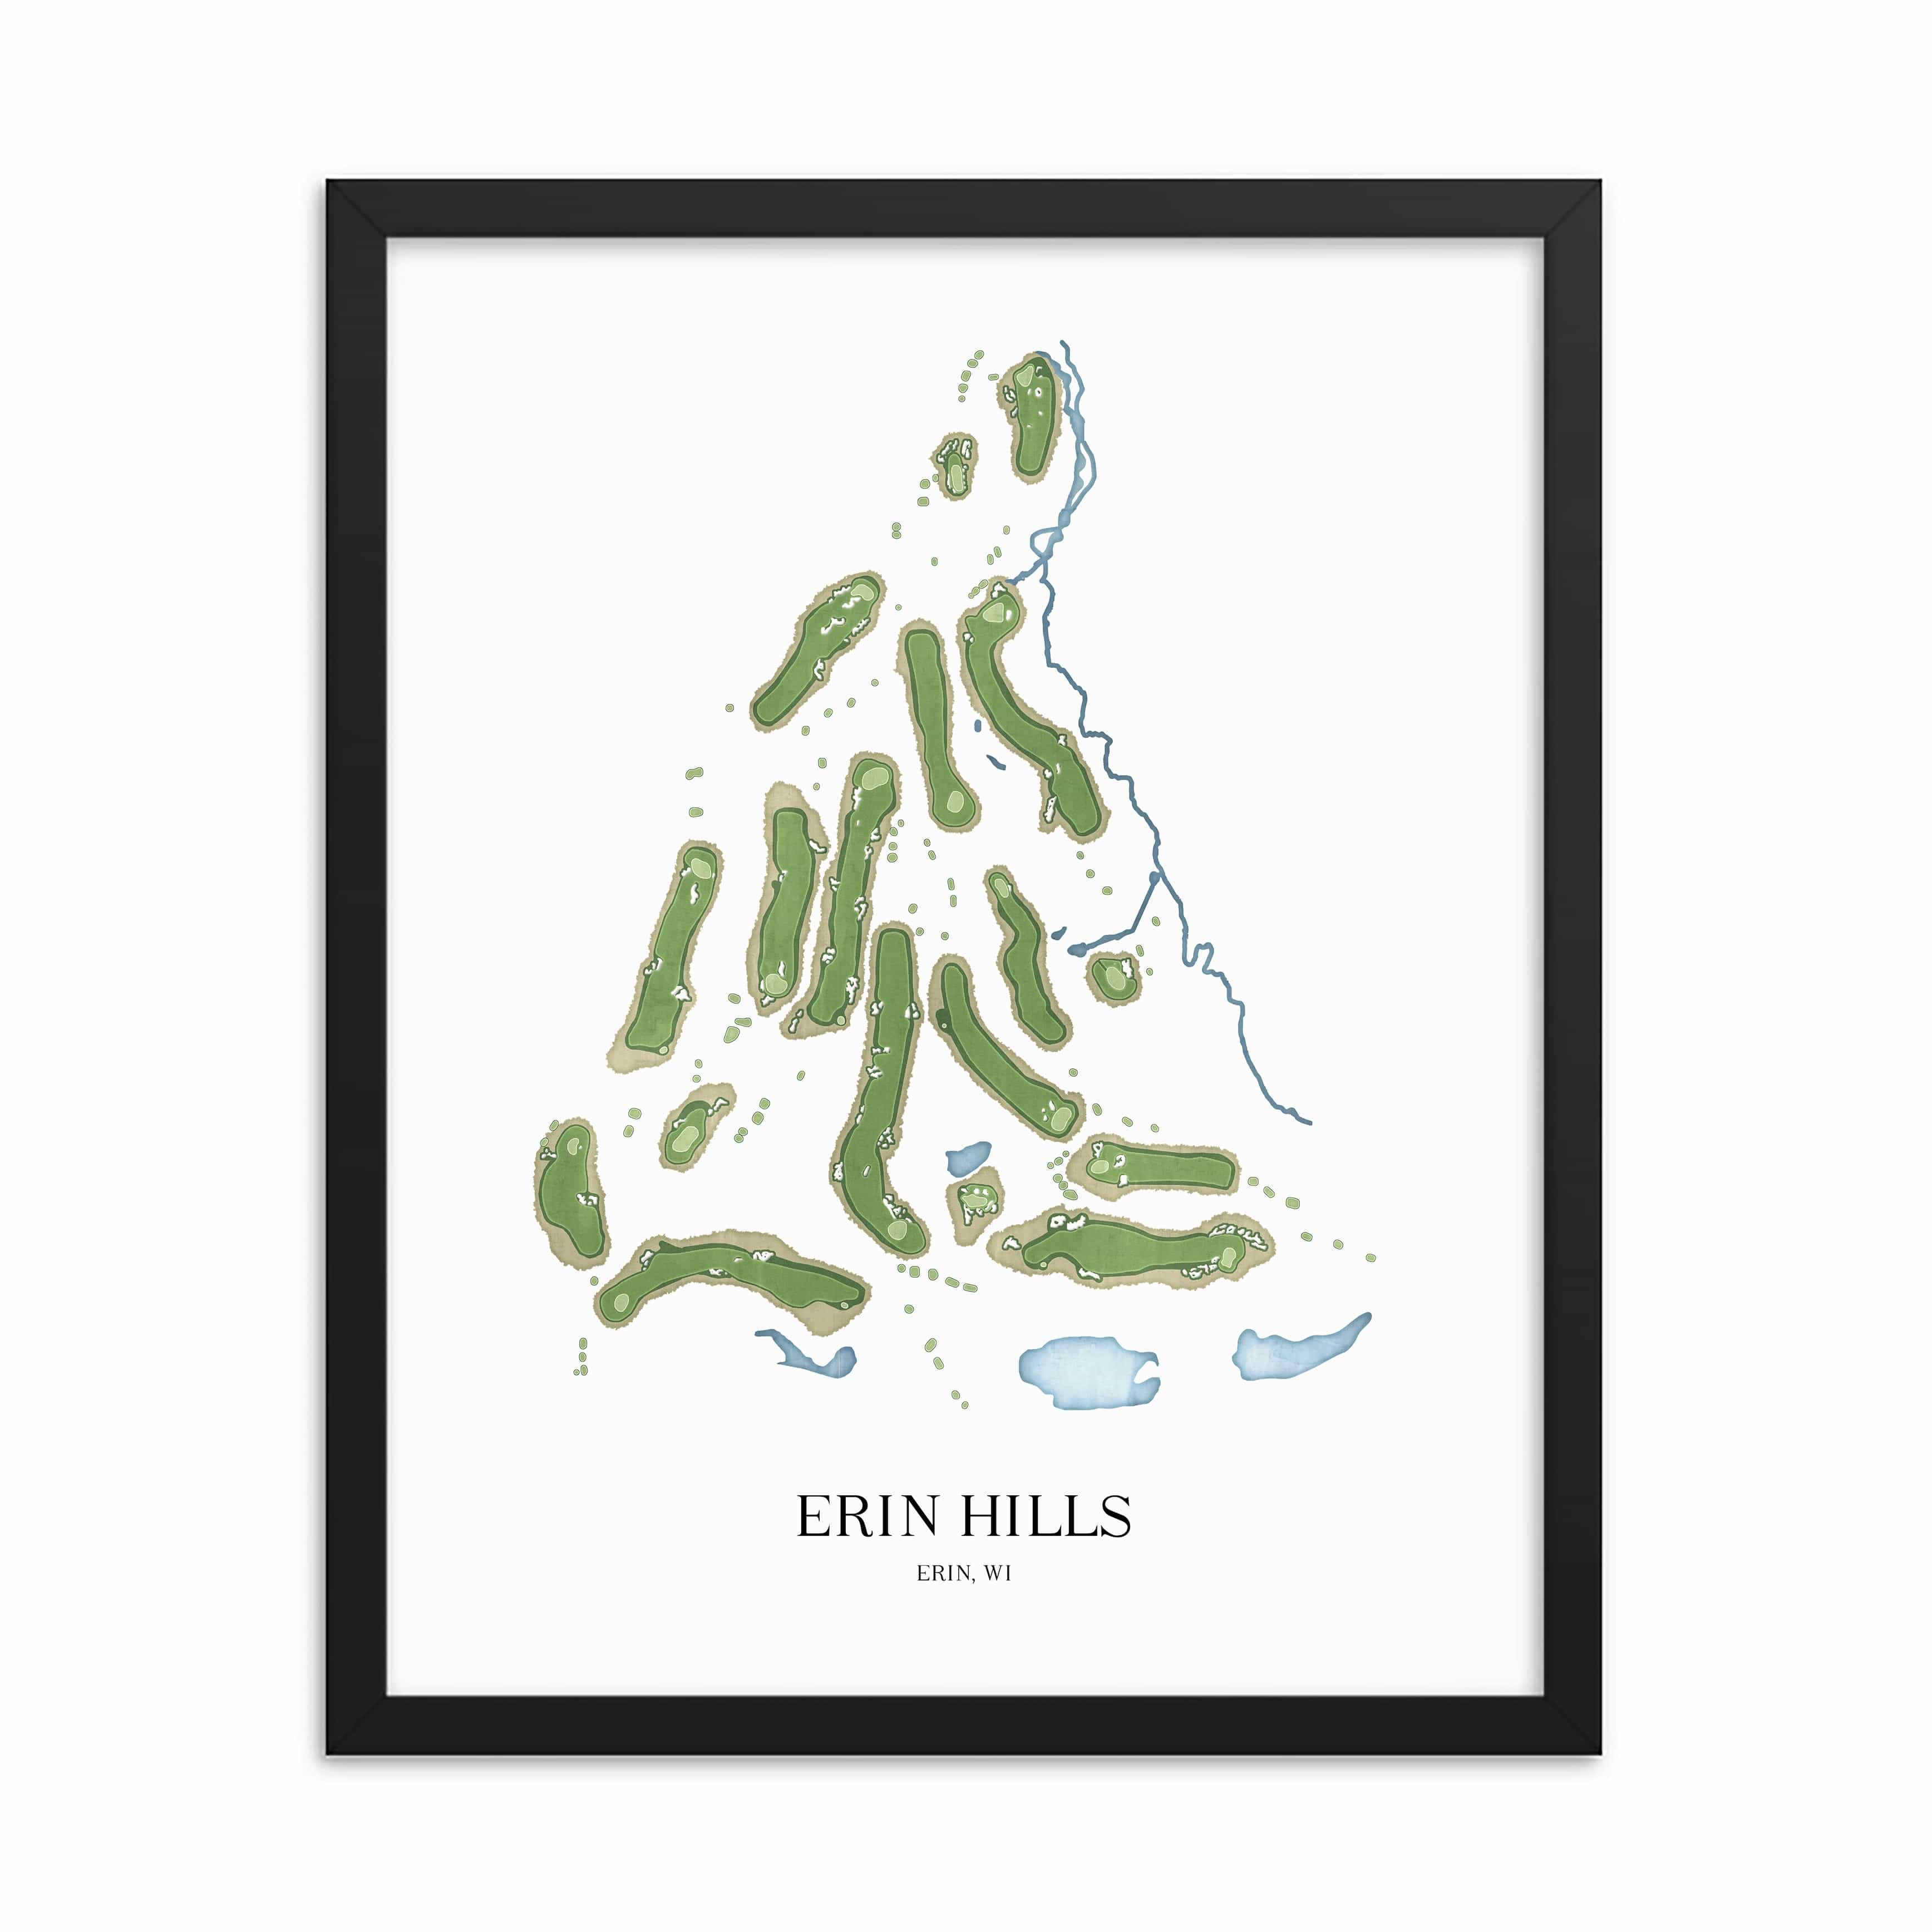 The 19th Hole Golf Shop - Golf Course Prints -  8" x 10" / Black Erin Hills Golf Course Map